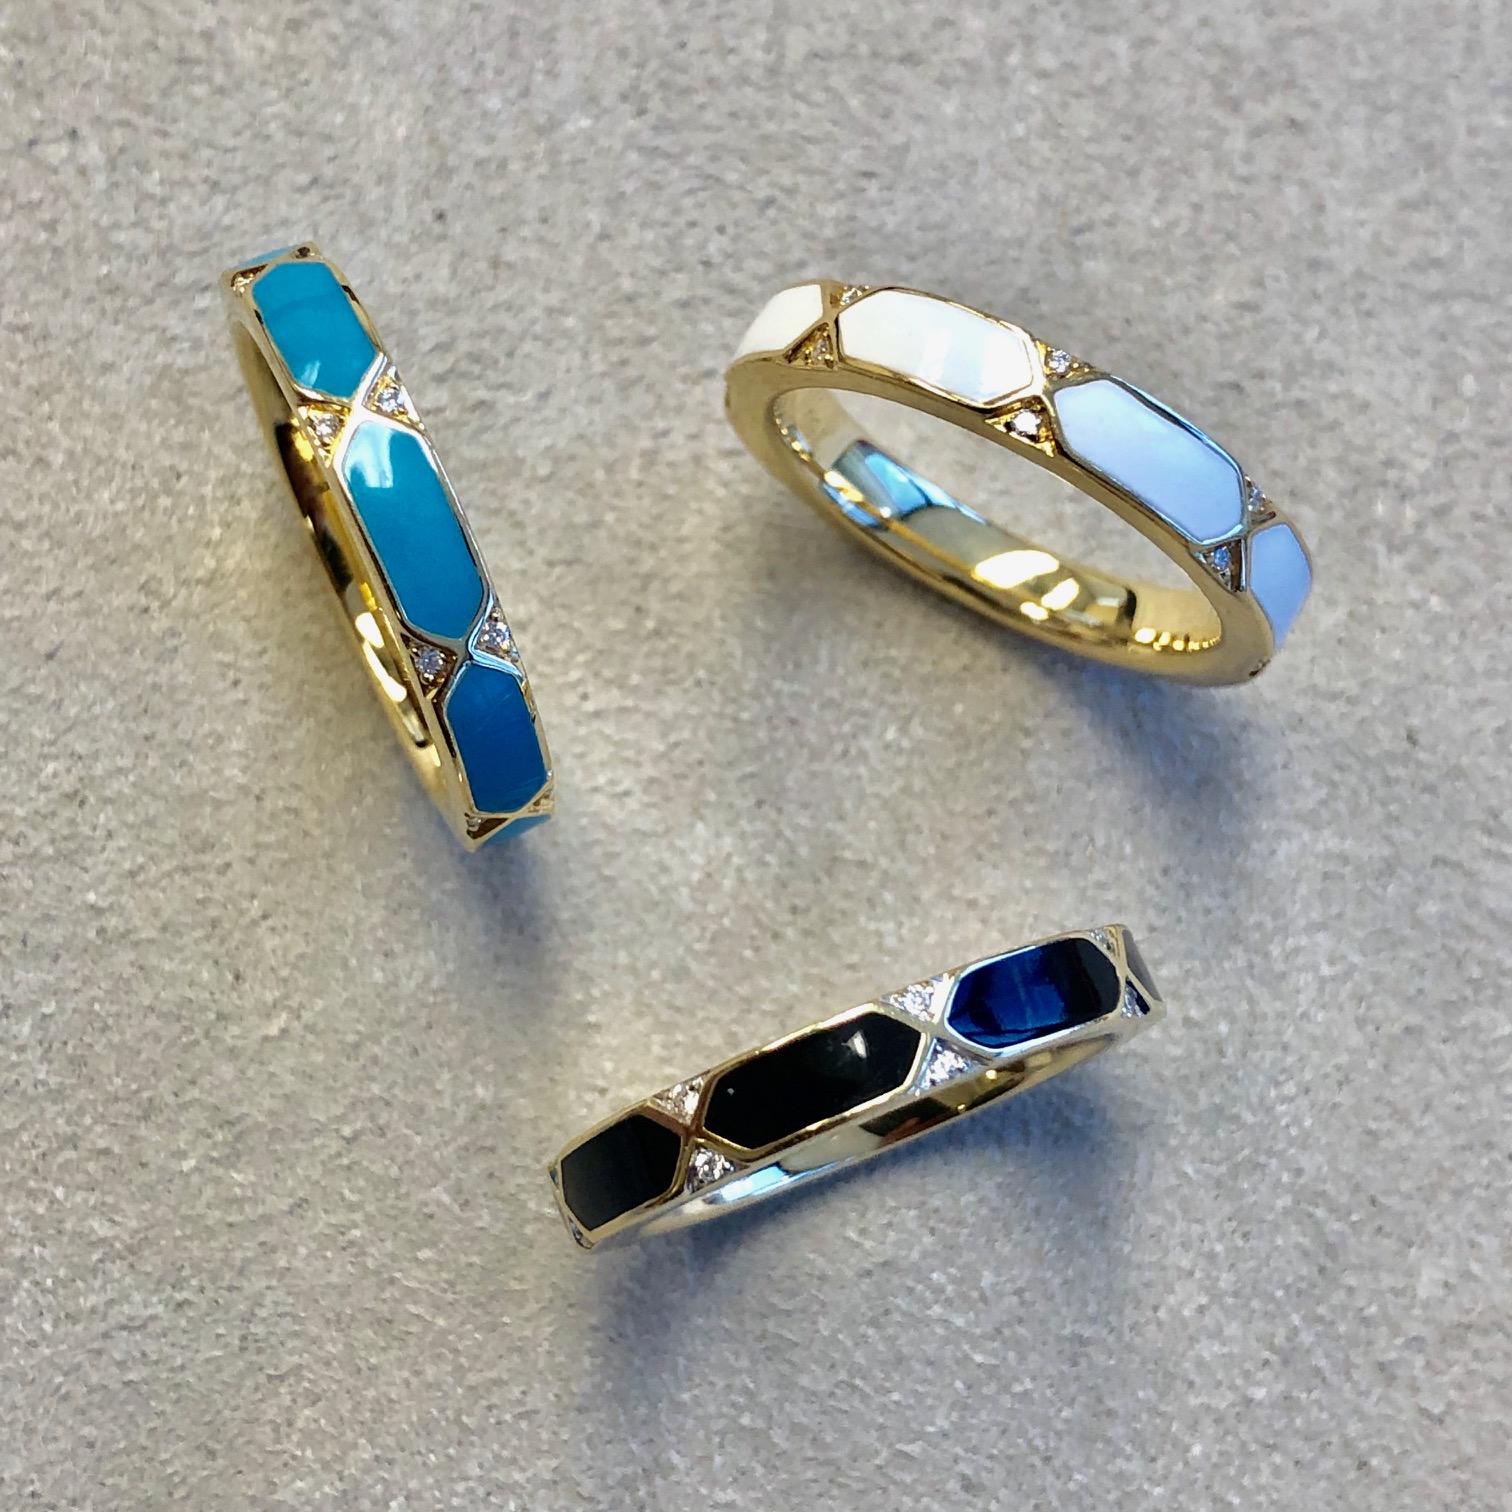 Created in 18 karat yellow gold
White enamel 
Diamonds 0.06 ct approx
Can be stacked with other colors. Other colors available are black and turquoise blue
Ring size US 6.5, Can be made in other ring sizes on special order